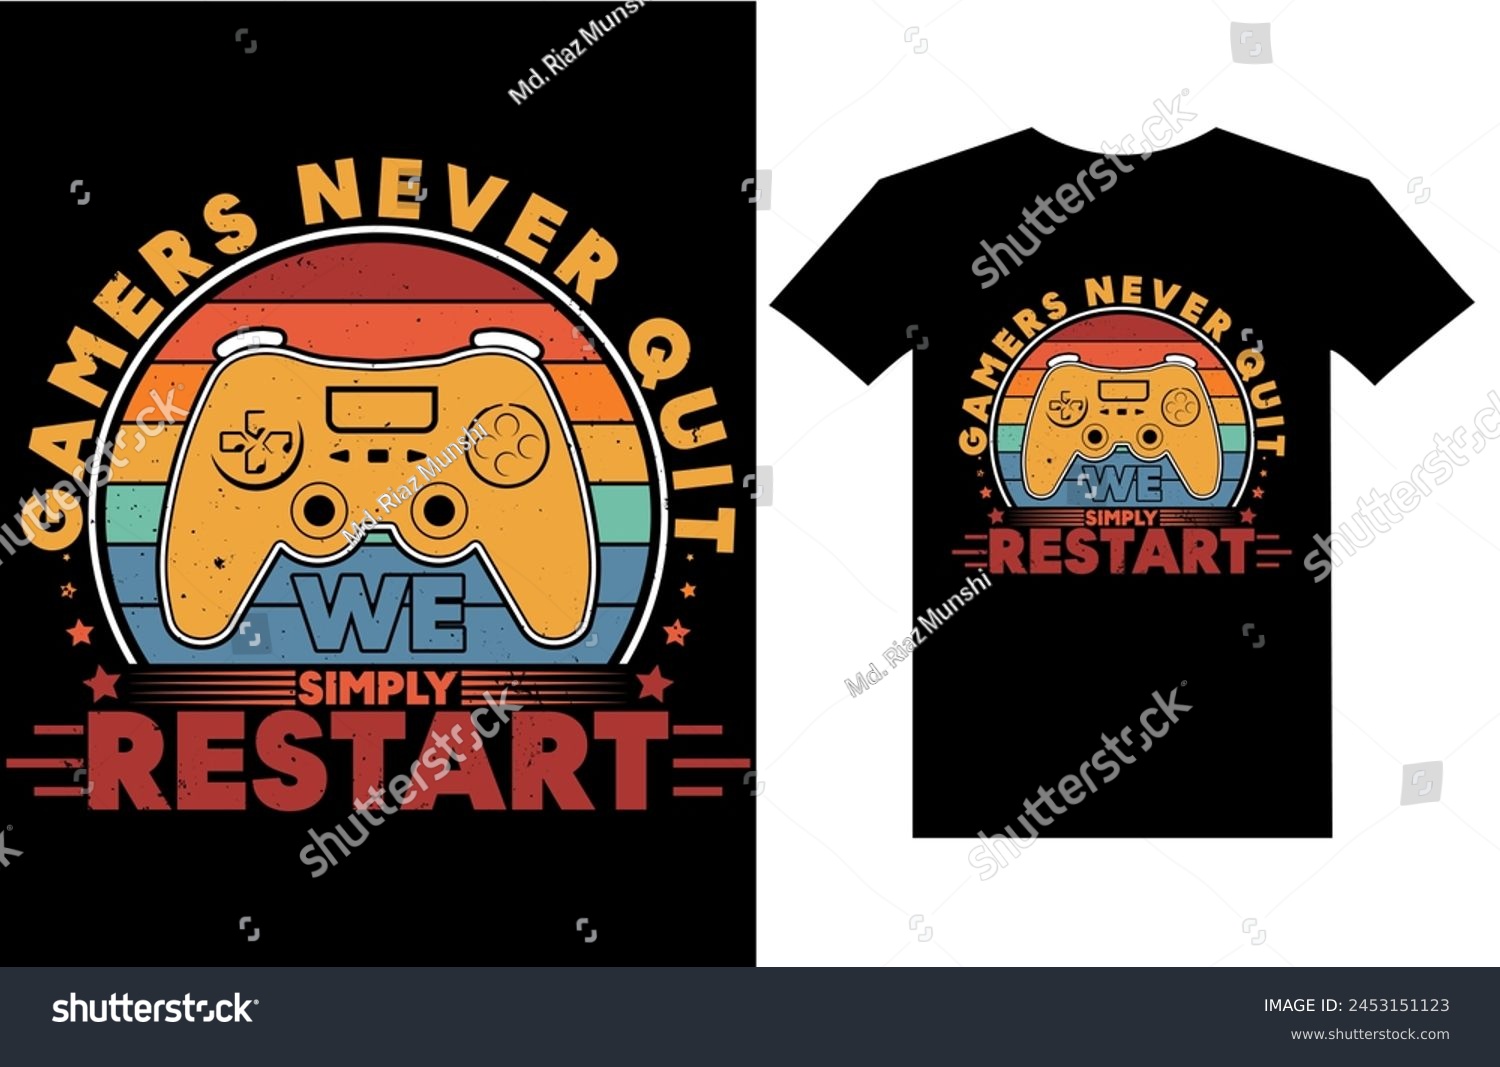 SVG of Gamers Never Quit We Simply Restart. Gaming Gamer t shirts design, Vector graphic, typographic poster or t-shirt svg